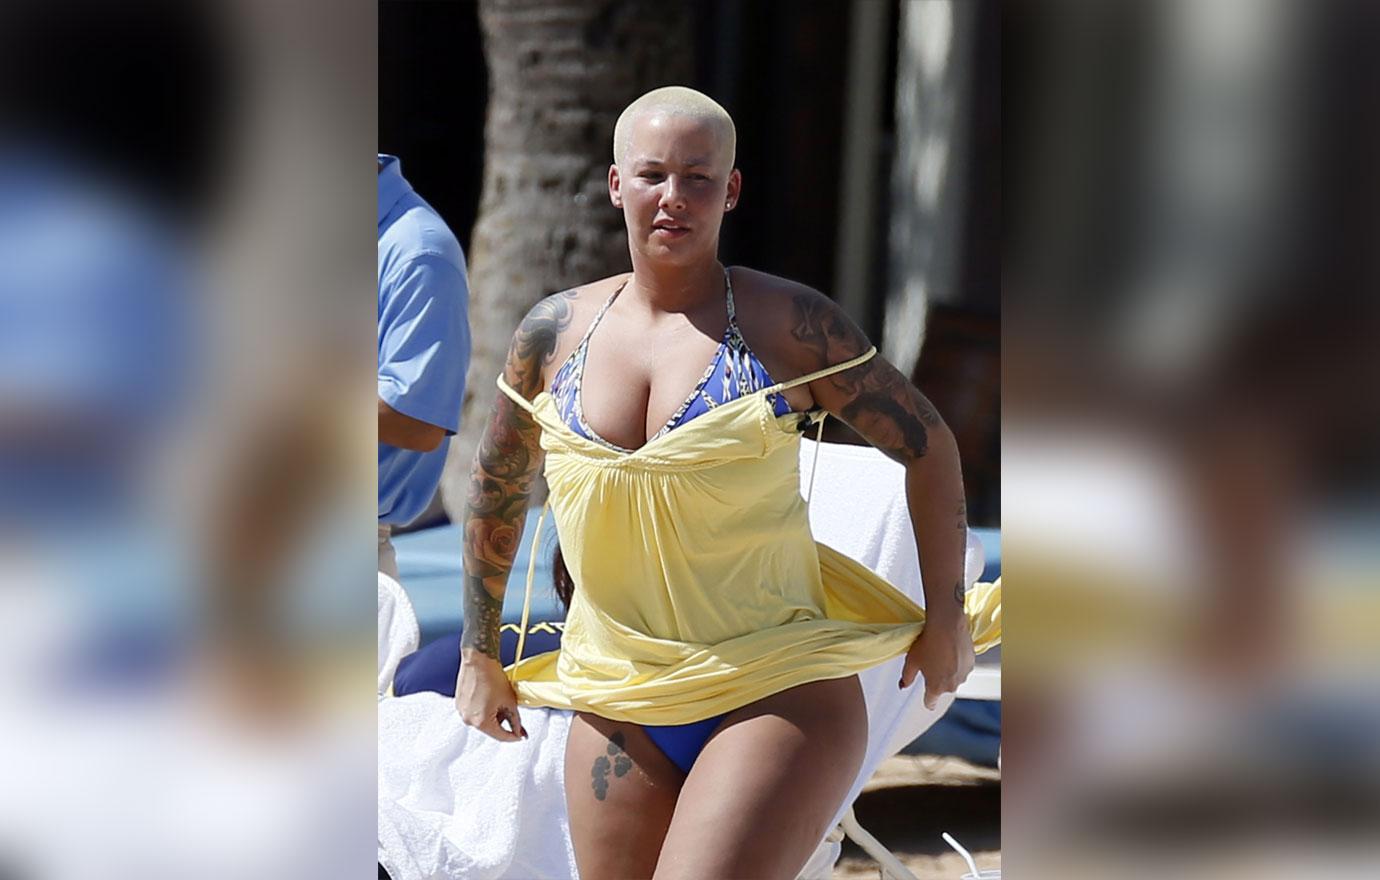 Amber Rose Caught With A Case Of Butt Fakery? See Her Humiliating